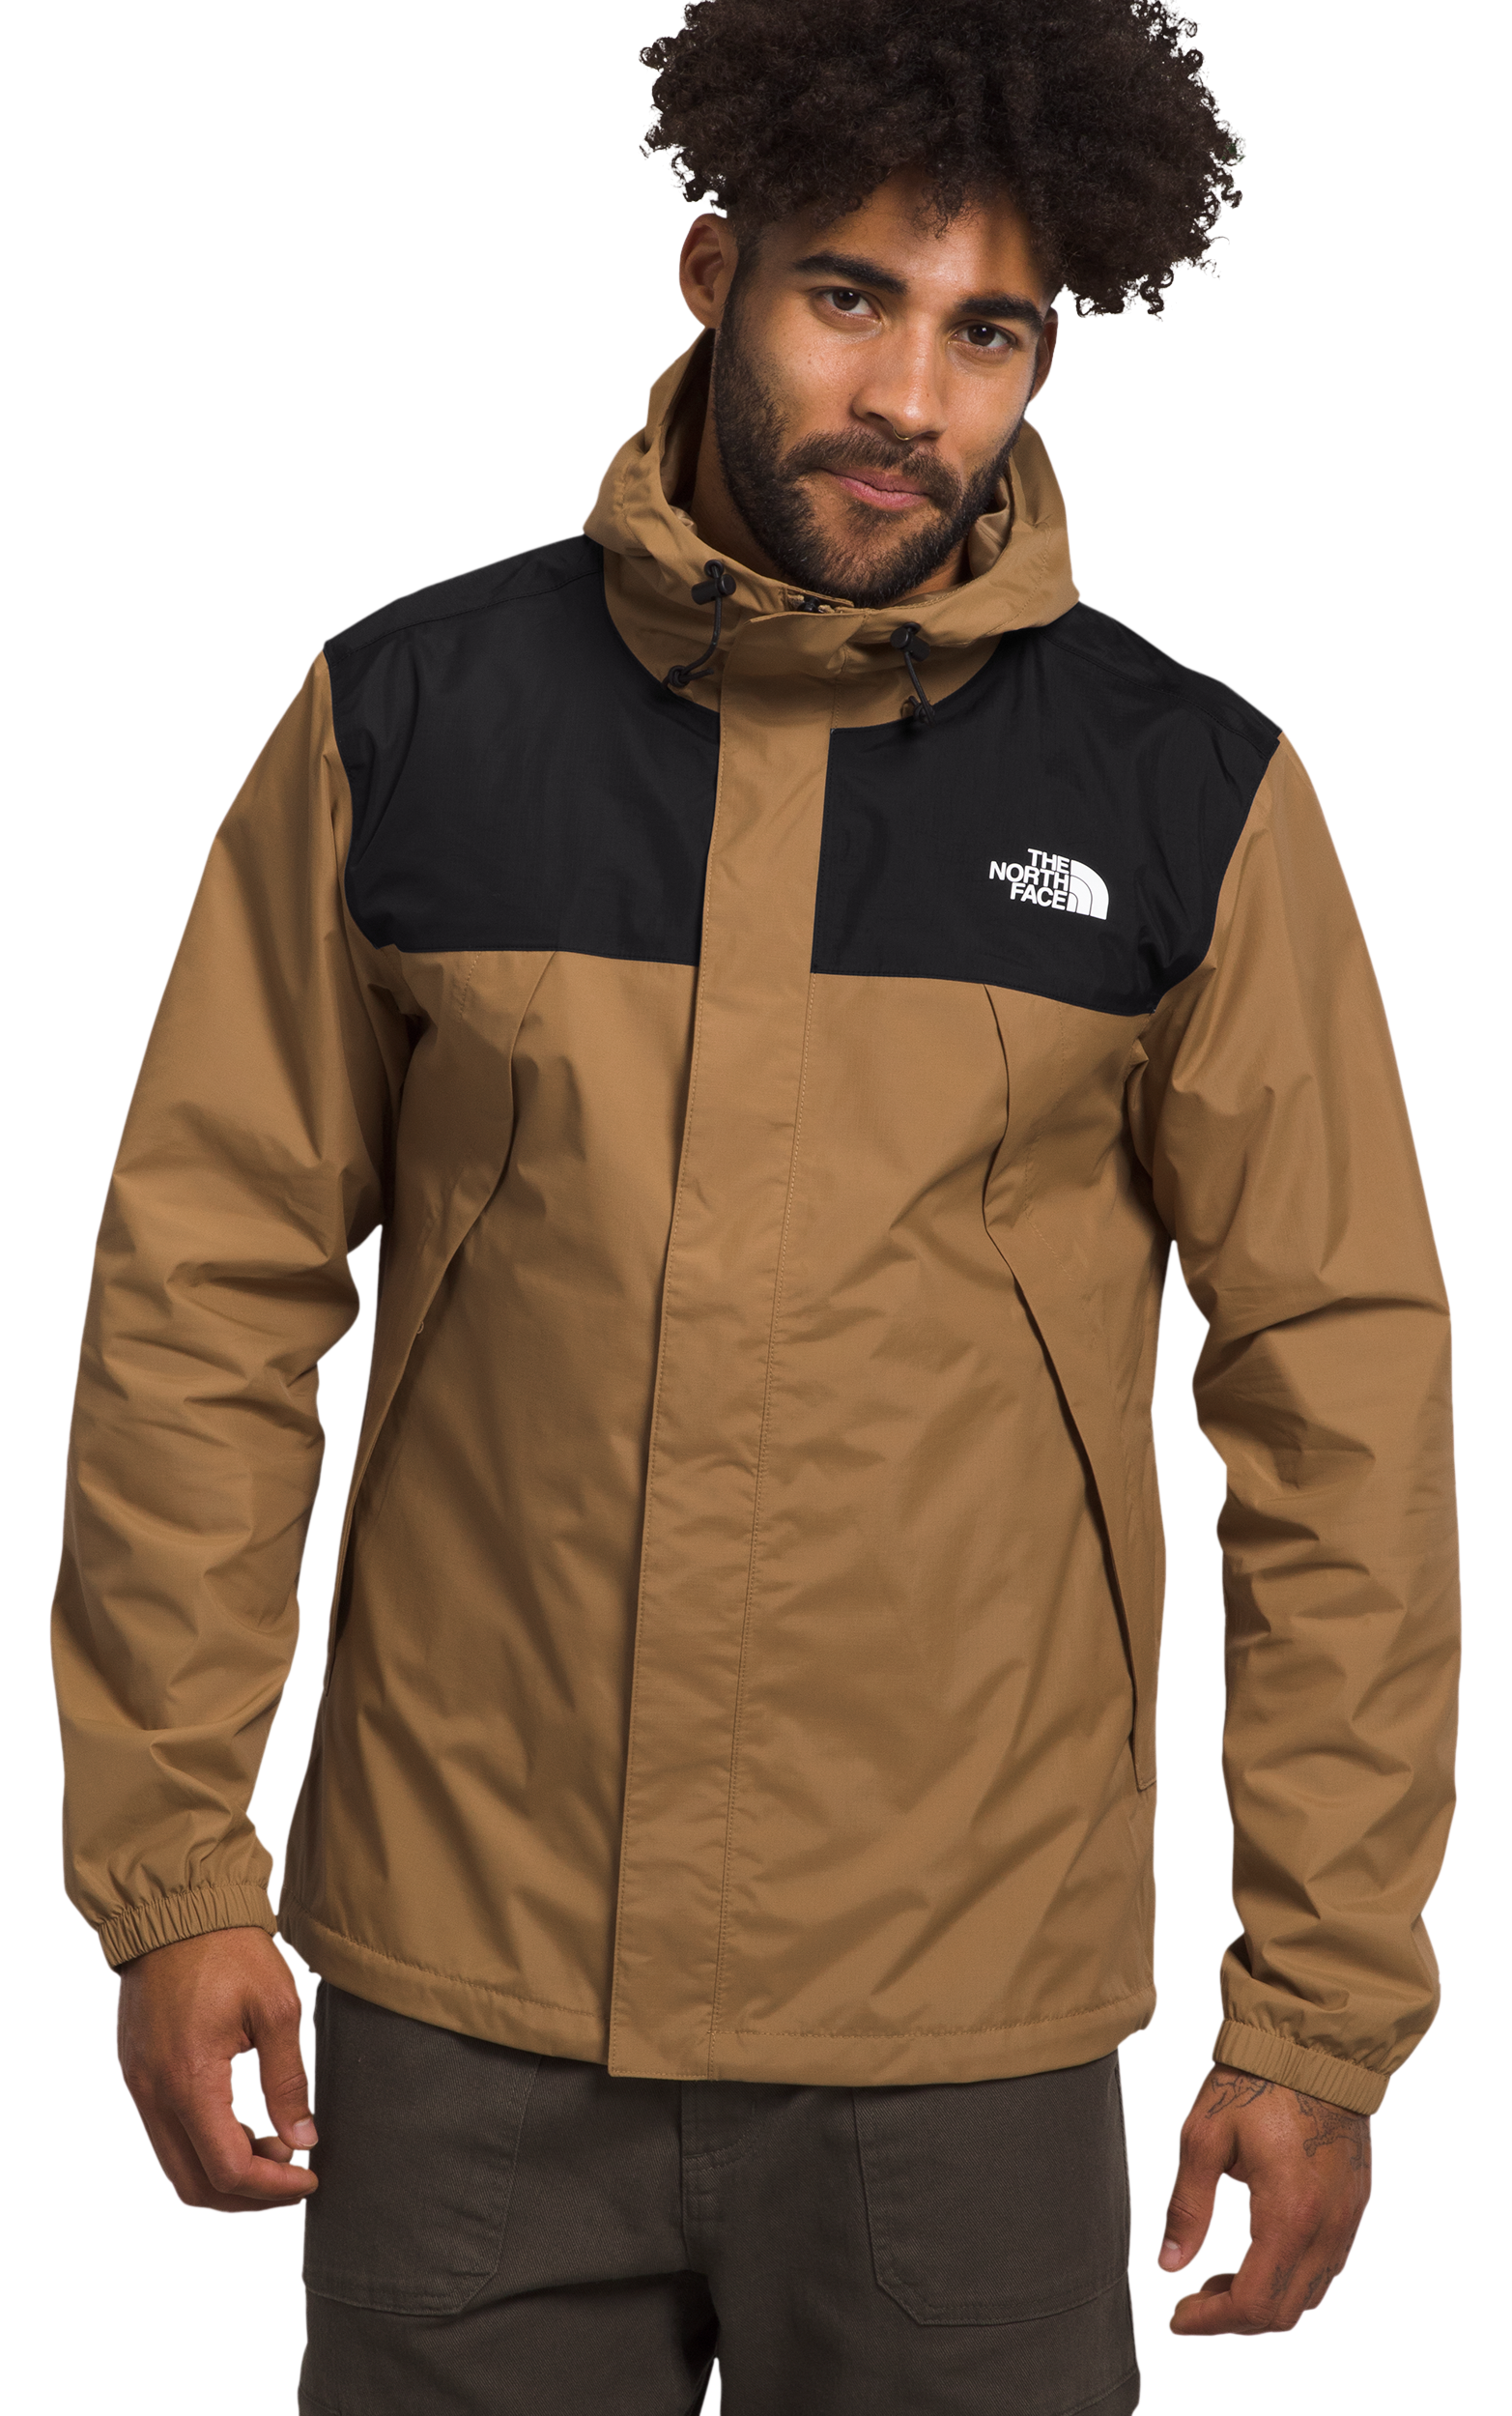 The North Face Antora Jacket for Men